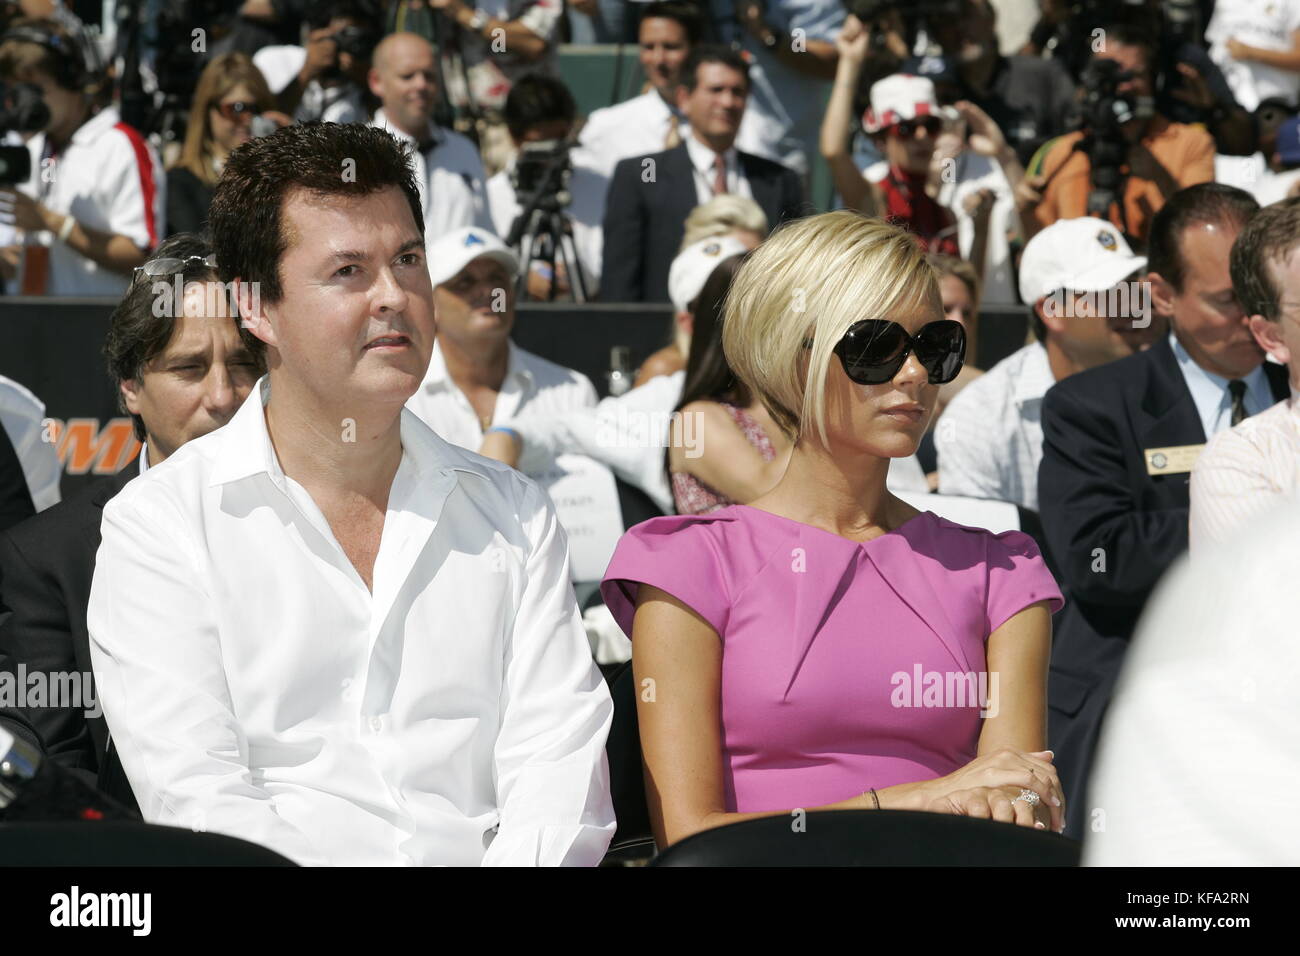 Victoria Beckham, wife of David Beckham, with Simon Fuller, left, at the official presentation of David Beckham to the Los Angeles Galaxy at the Home Depot Center in Carson, CA on July 13, 2007. Photo credit: Francis Specker Stock Photo